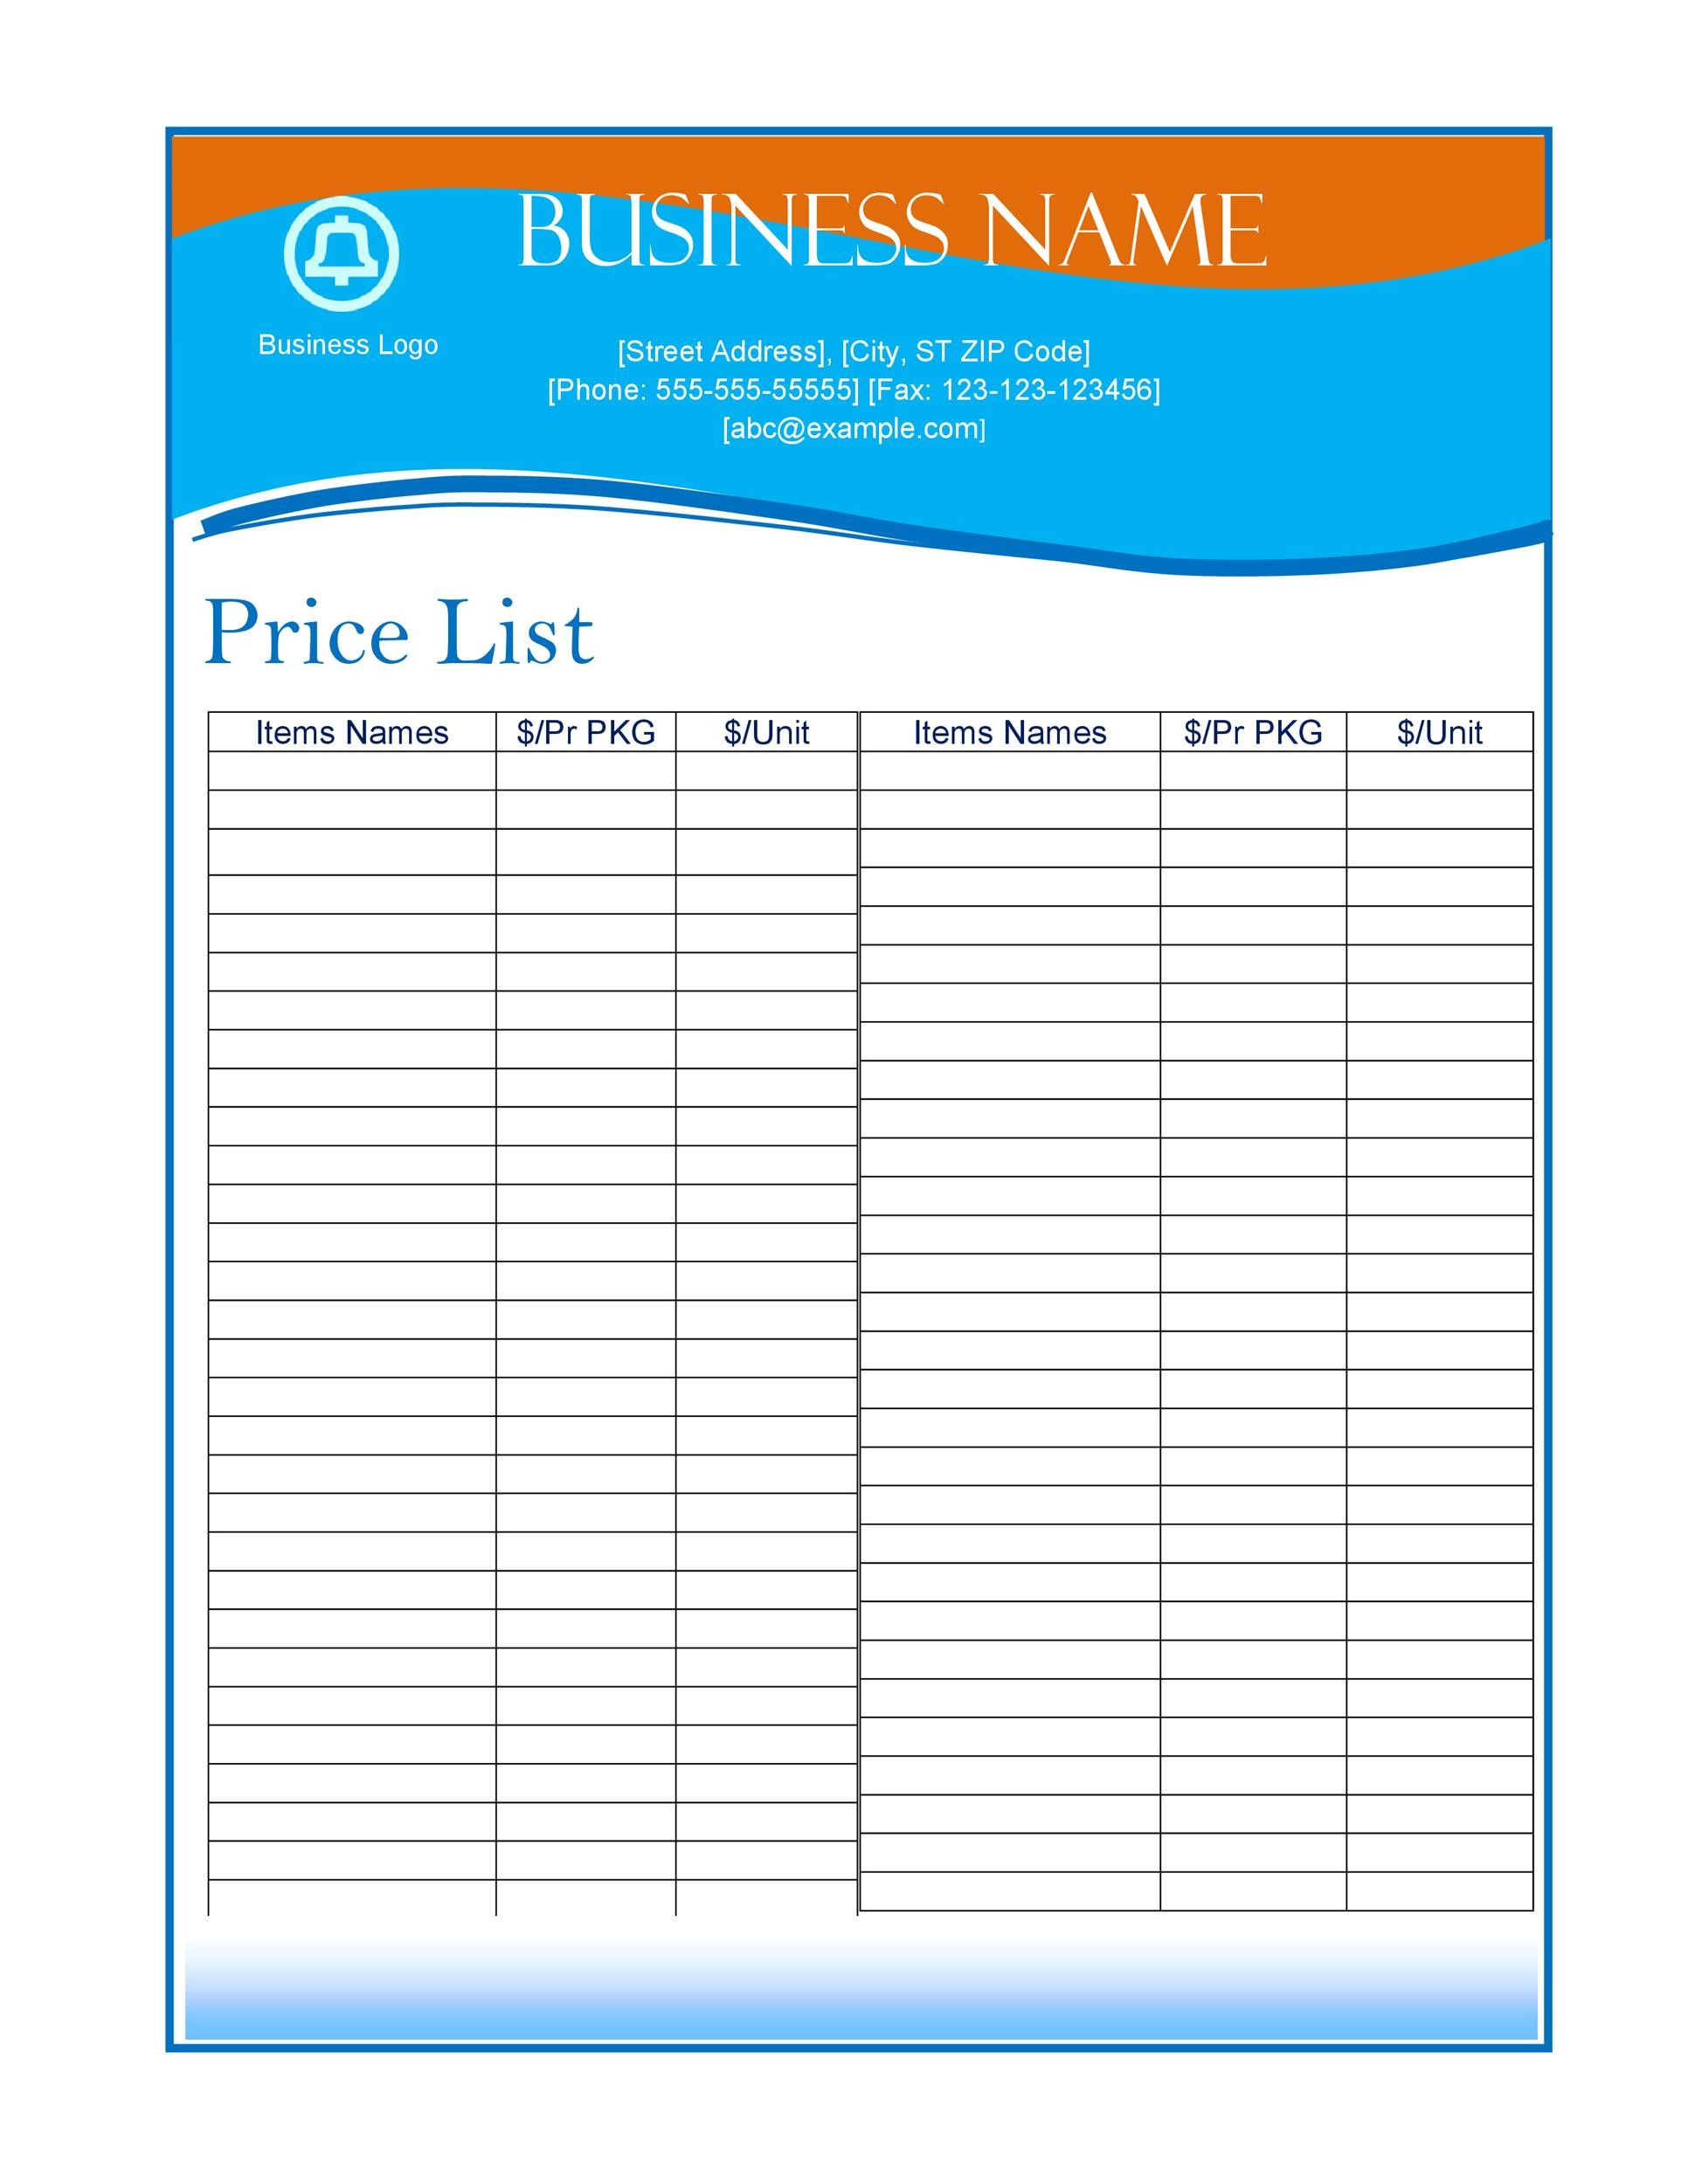 Business Price List Template | TUTORE.ORG - Master of Documents